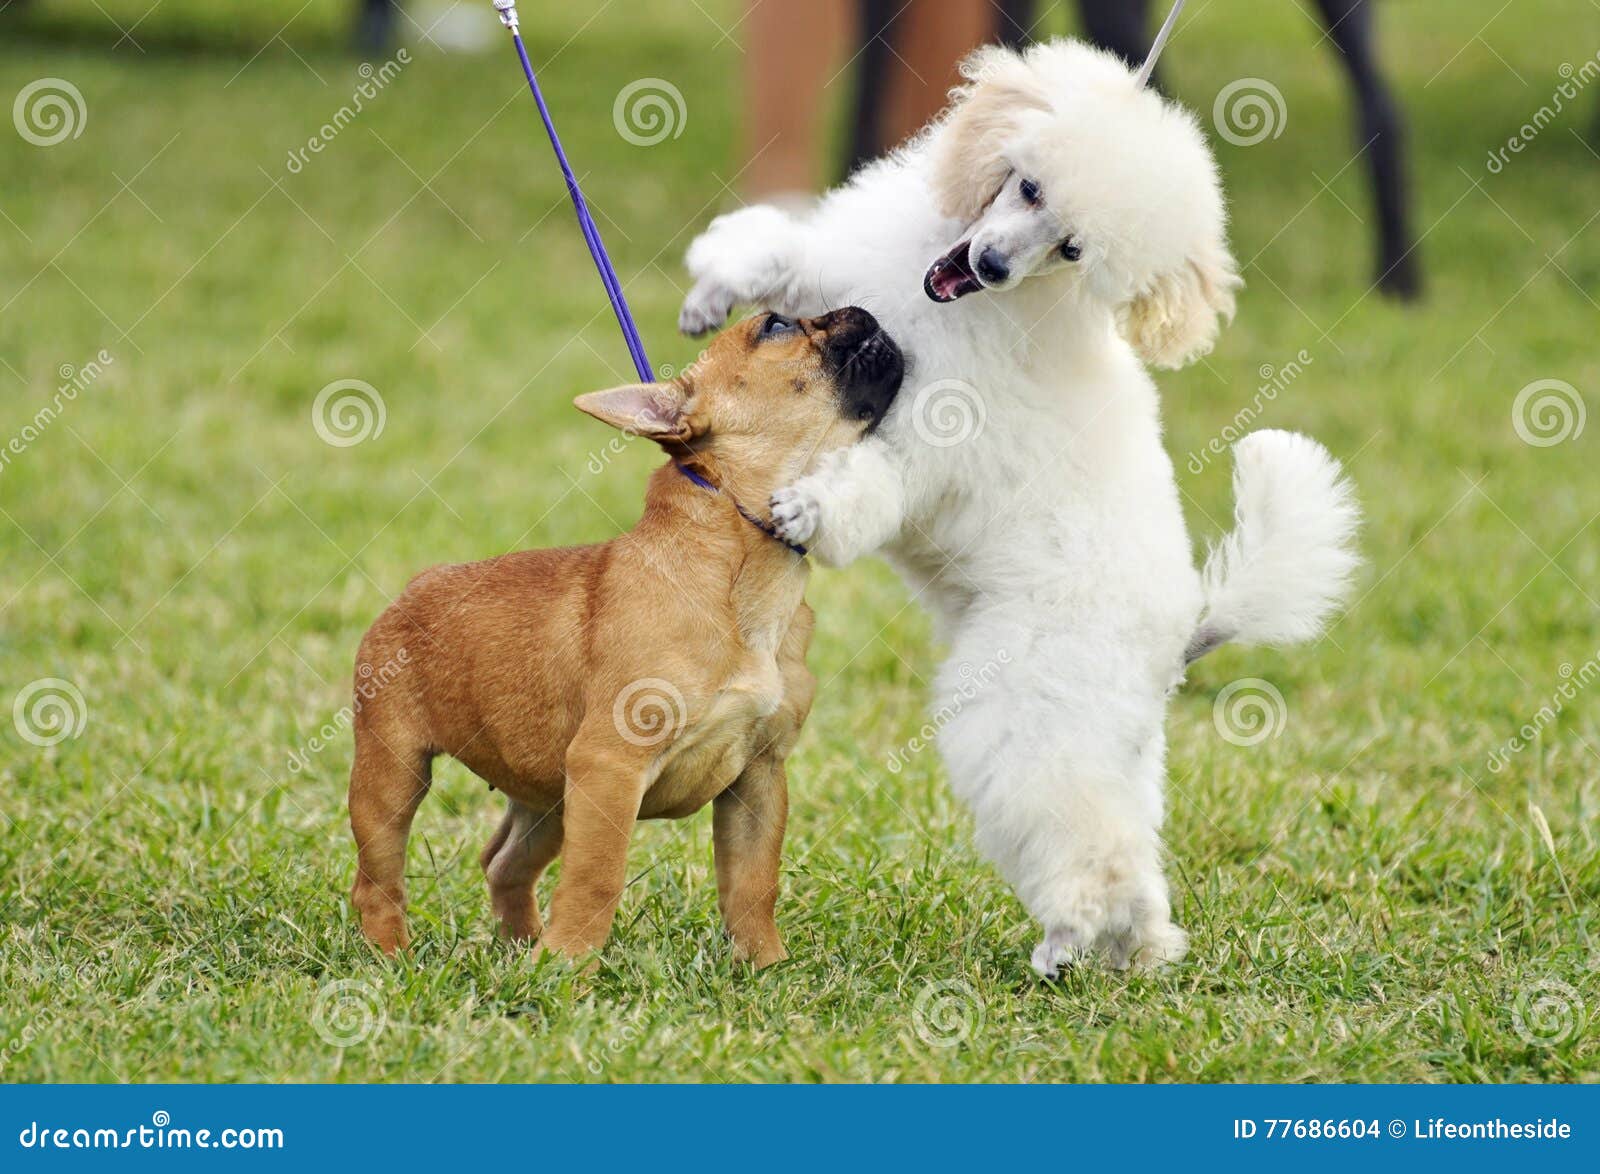 a pair of different breed pedigree playful puppy dogs playing together